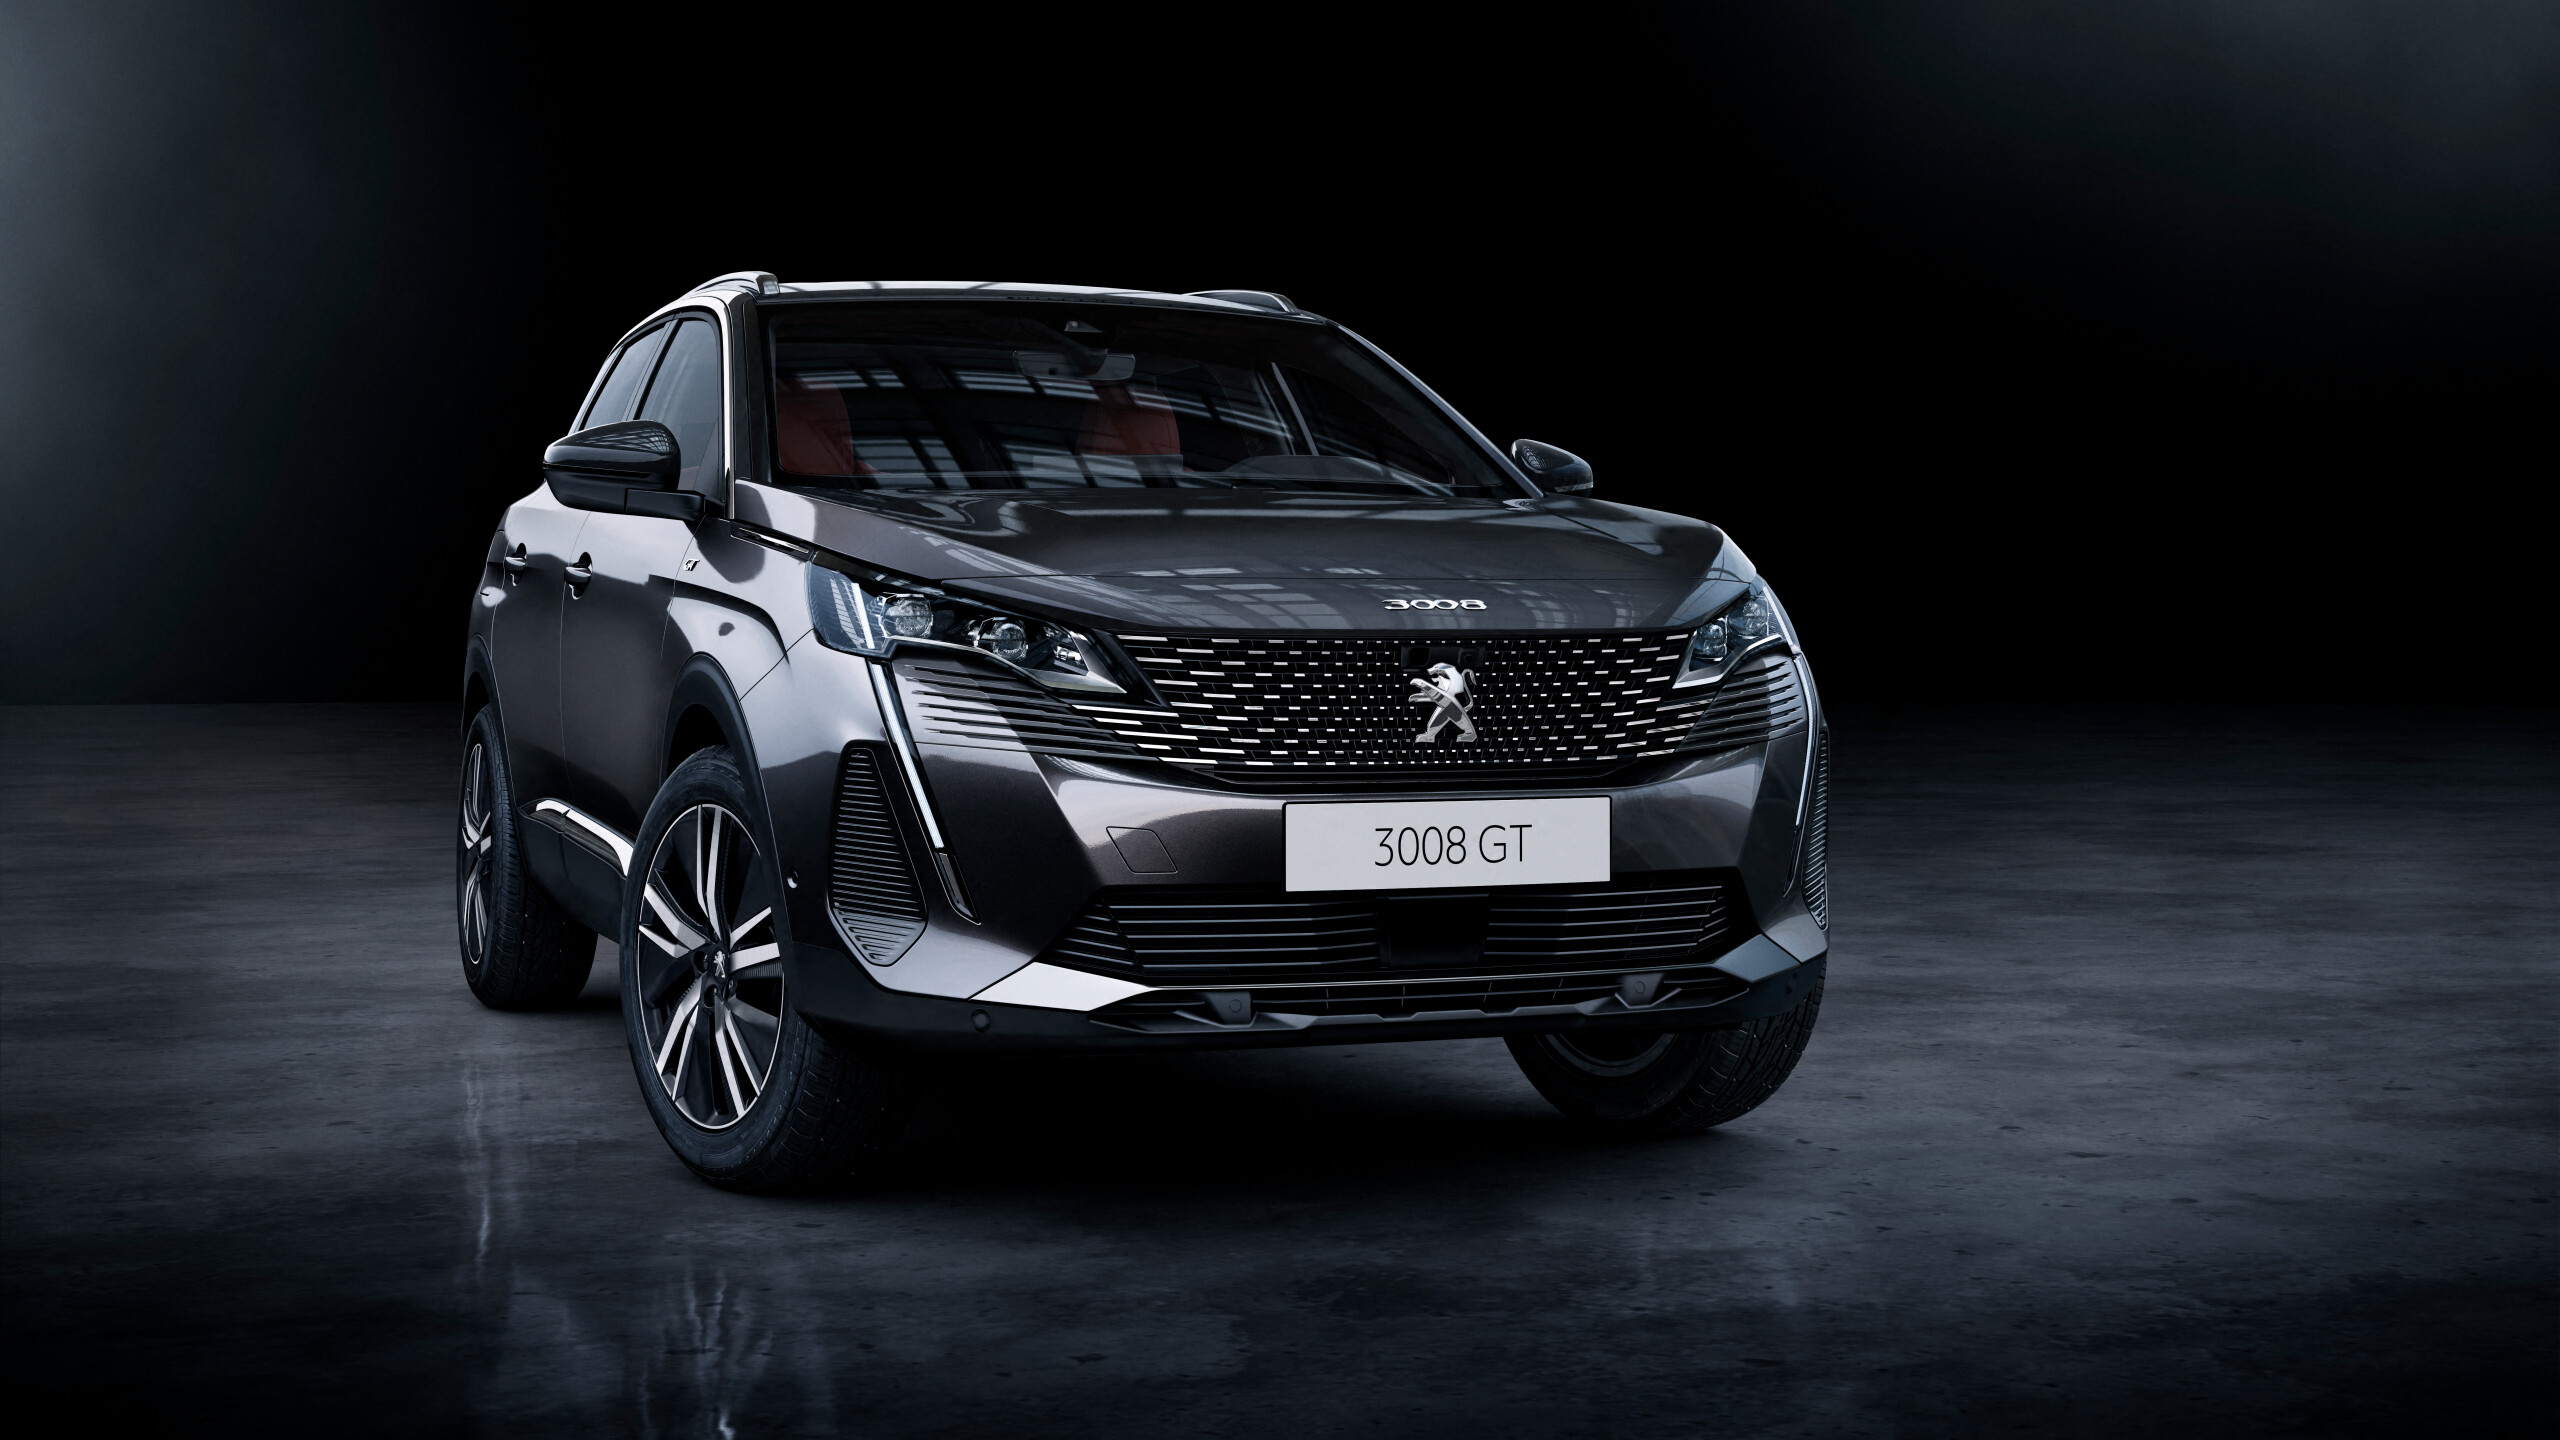 Peugeot: 3008 GT, the European Car of the Year 2017. 2560x1440 HD Wallpaper.